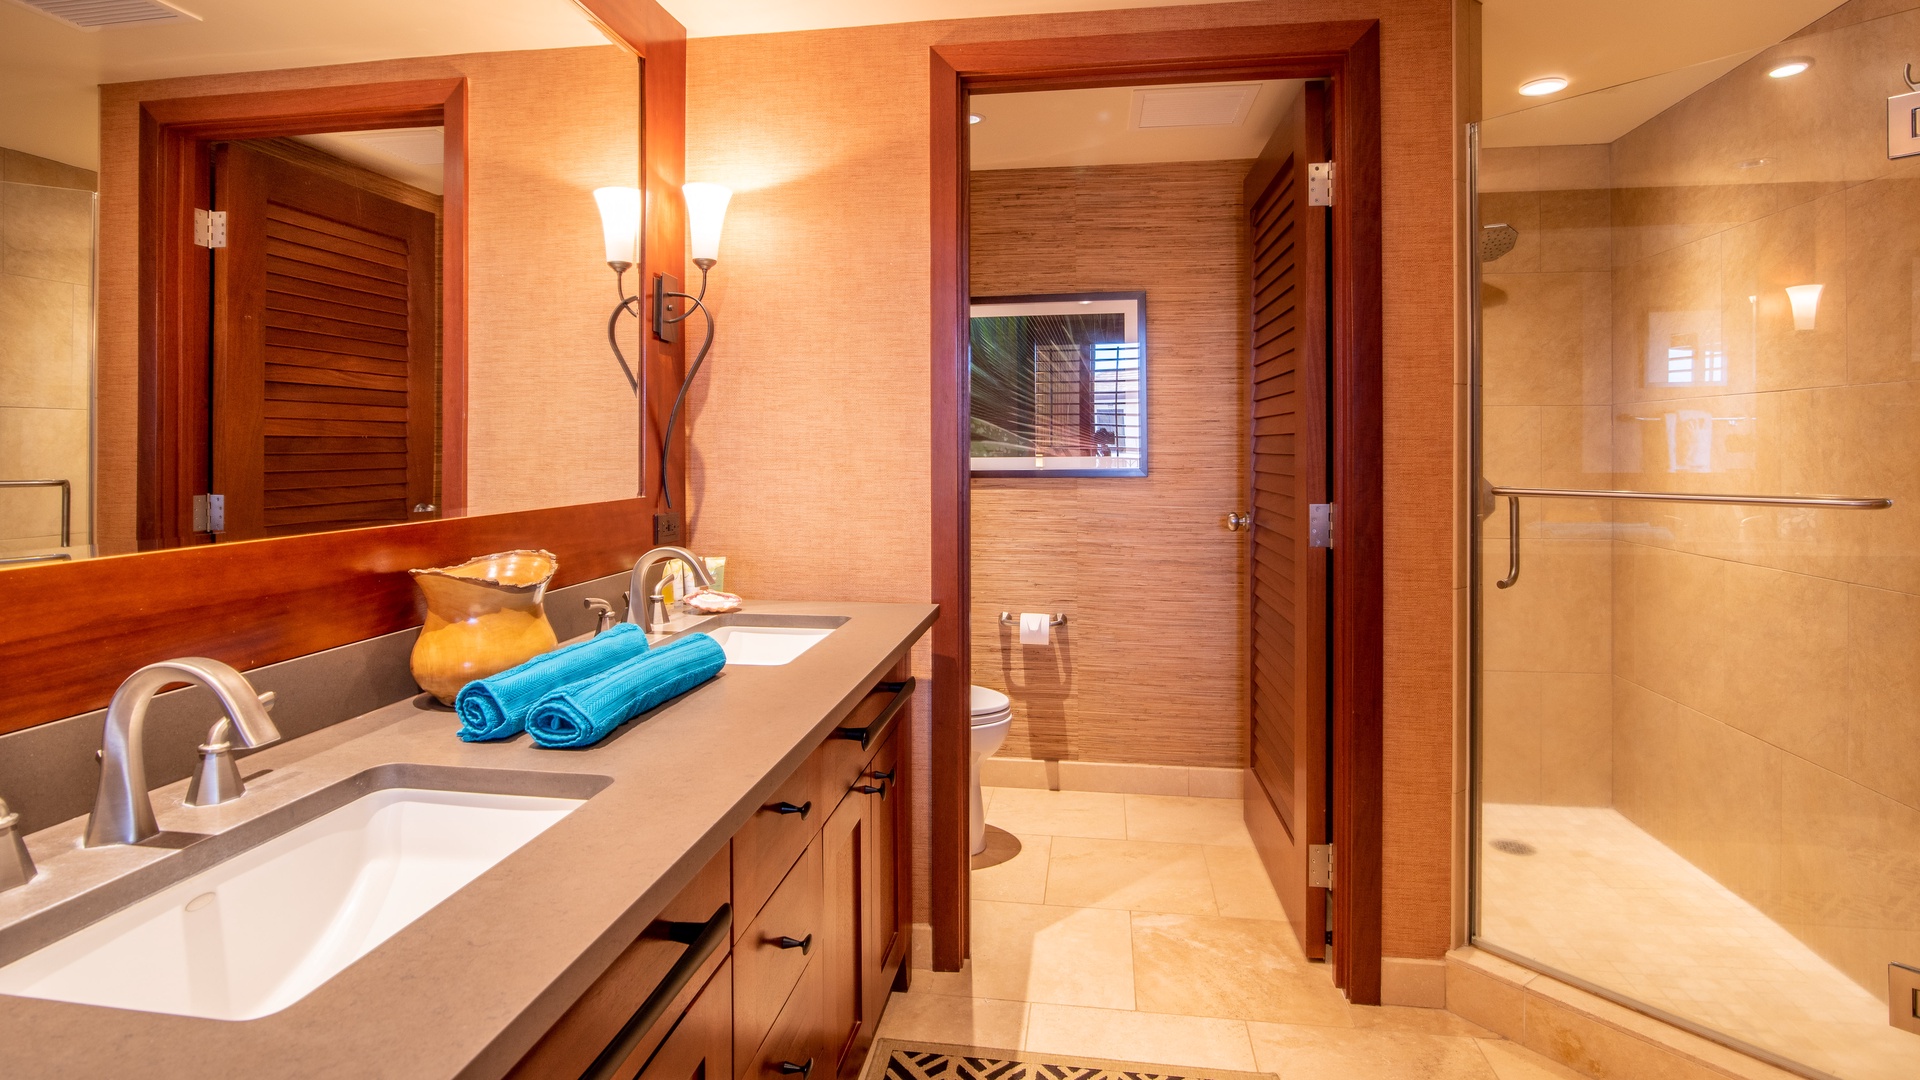 Kapolei Vacation Rentals, Ko Olina Beach Villas O1111 - The primary guest bathroom with a double vanity.